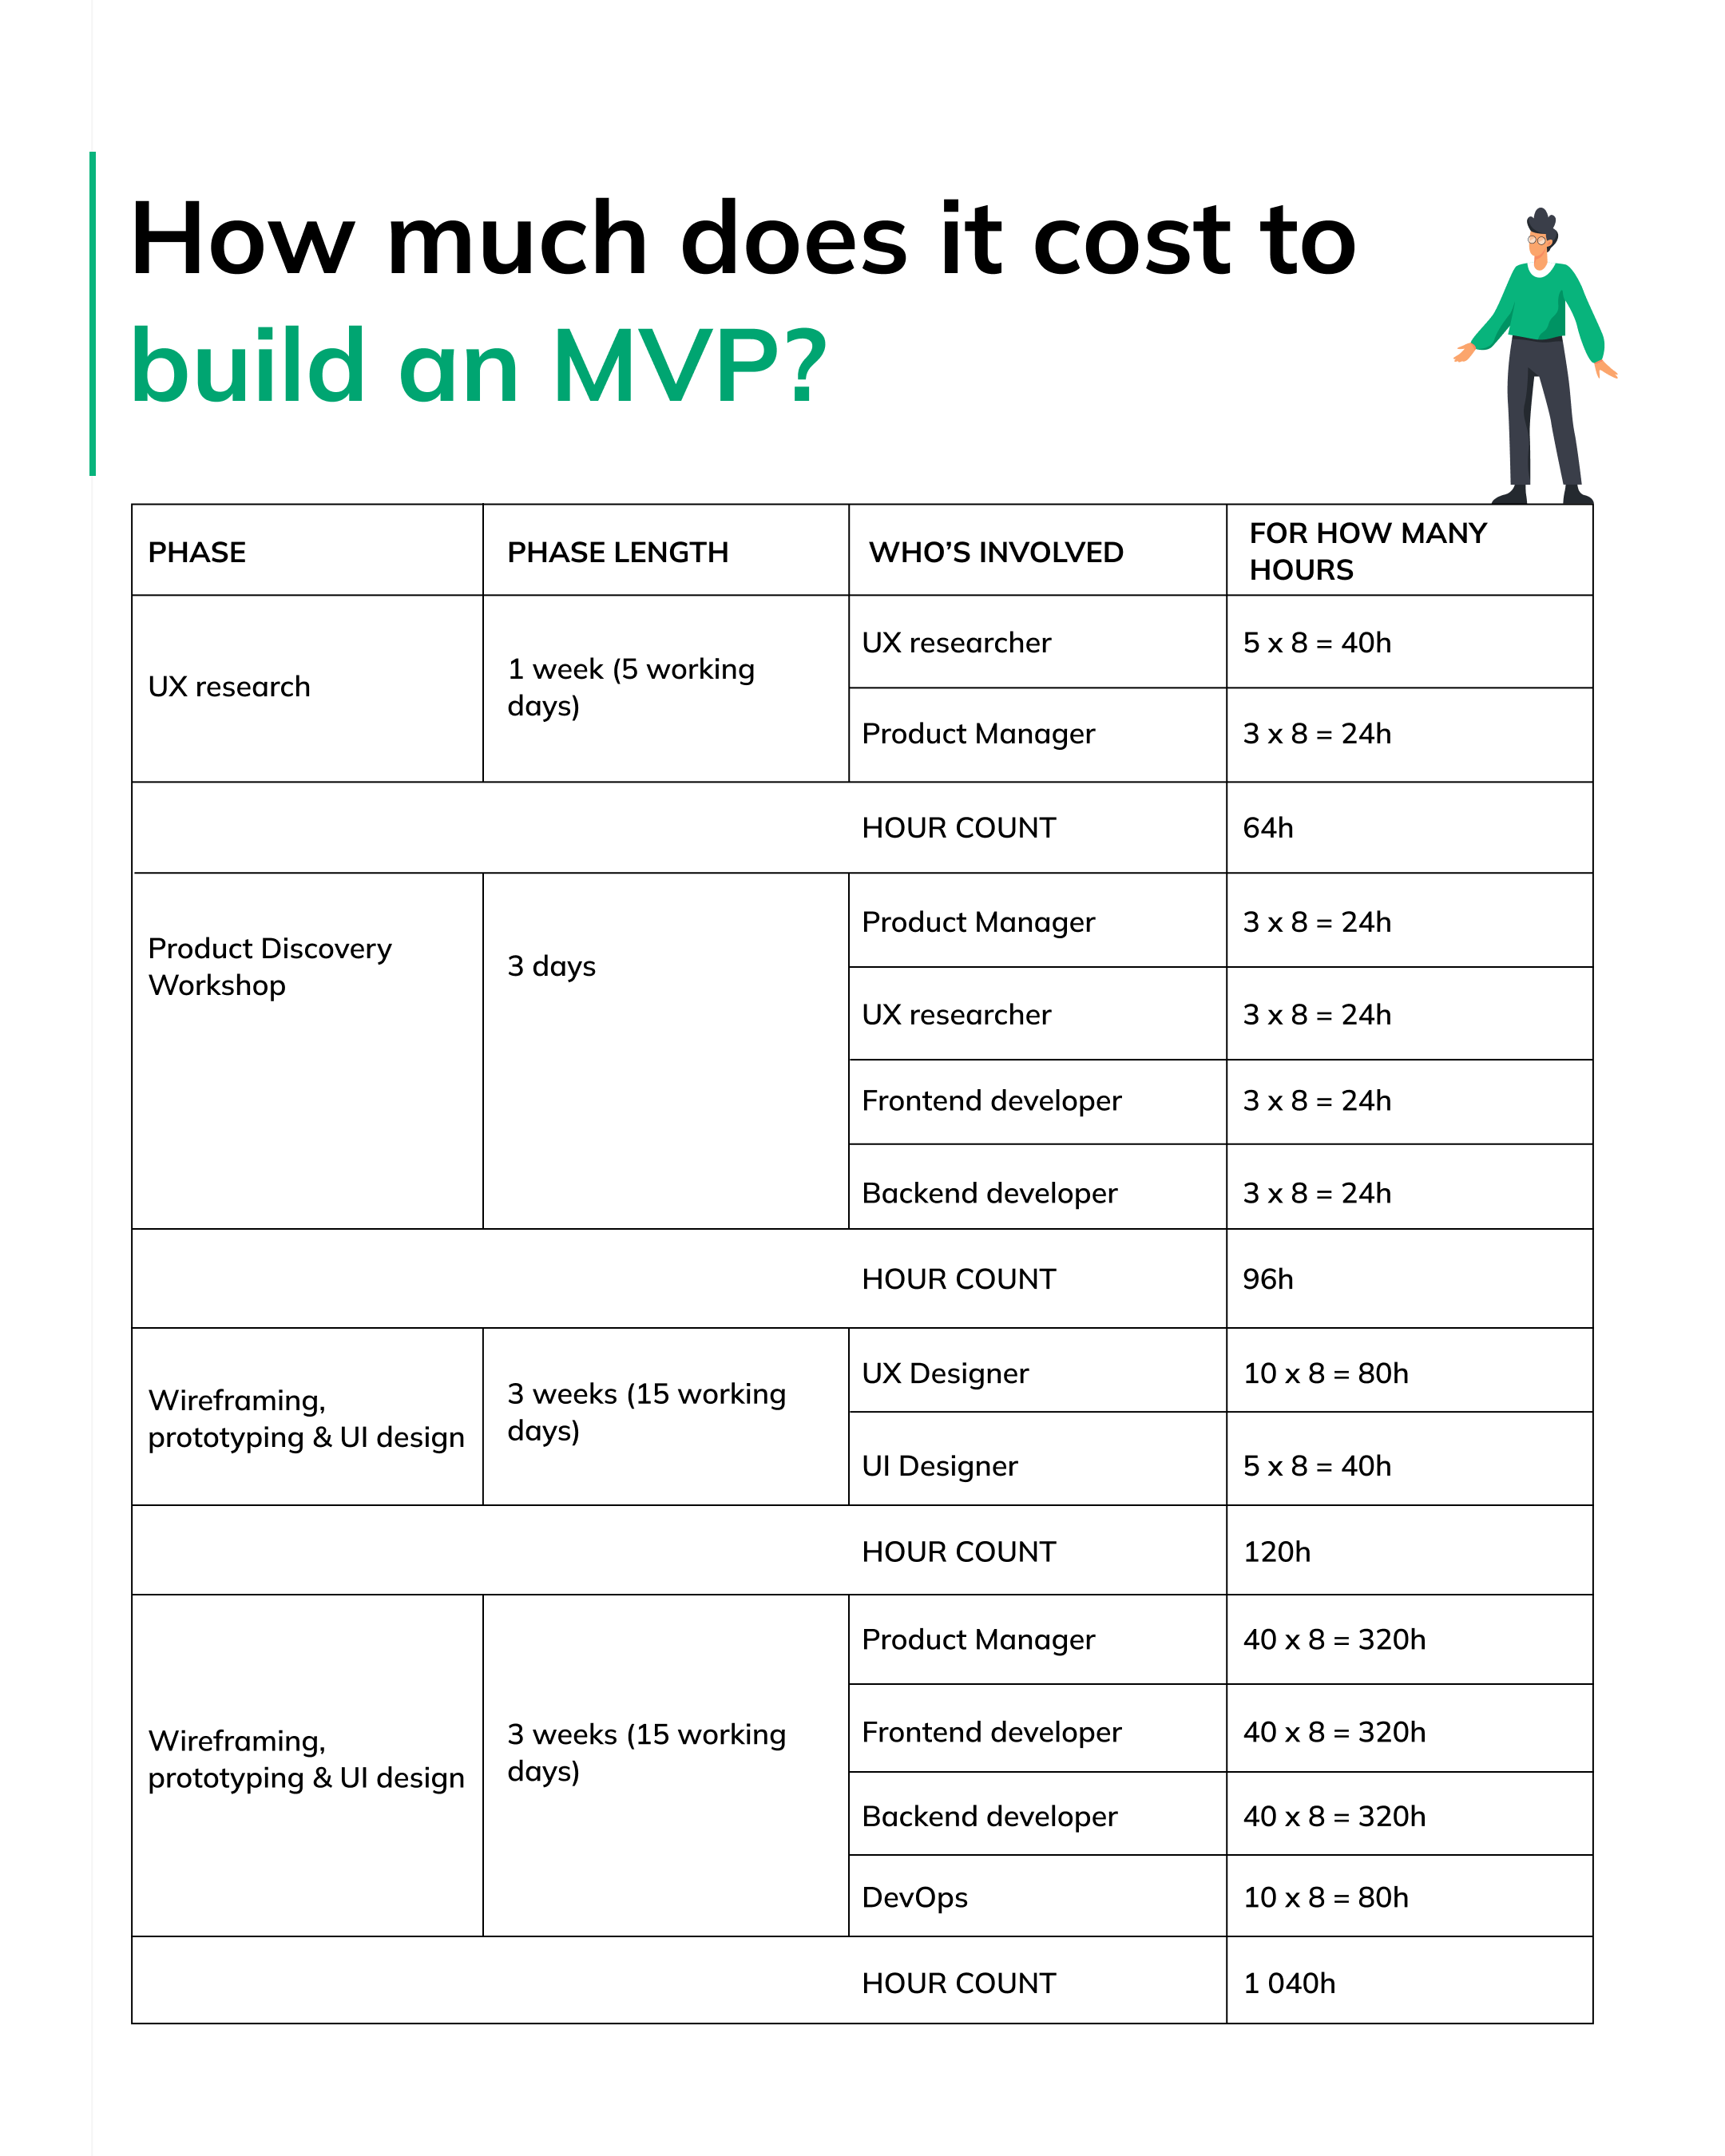 How much does it cost to build an MVP